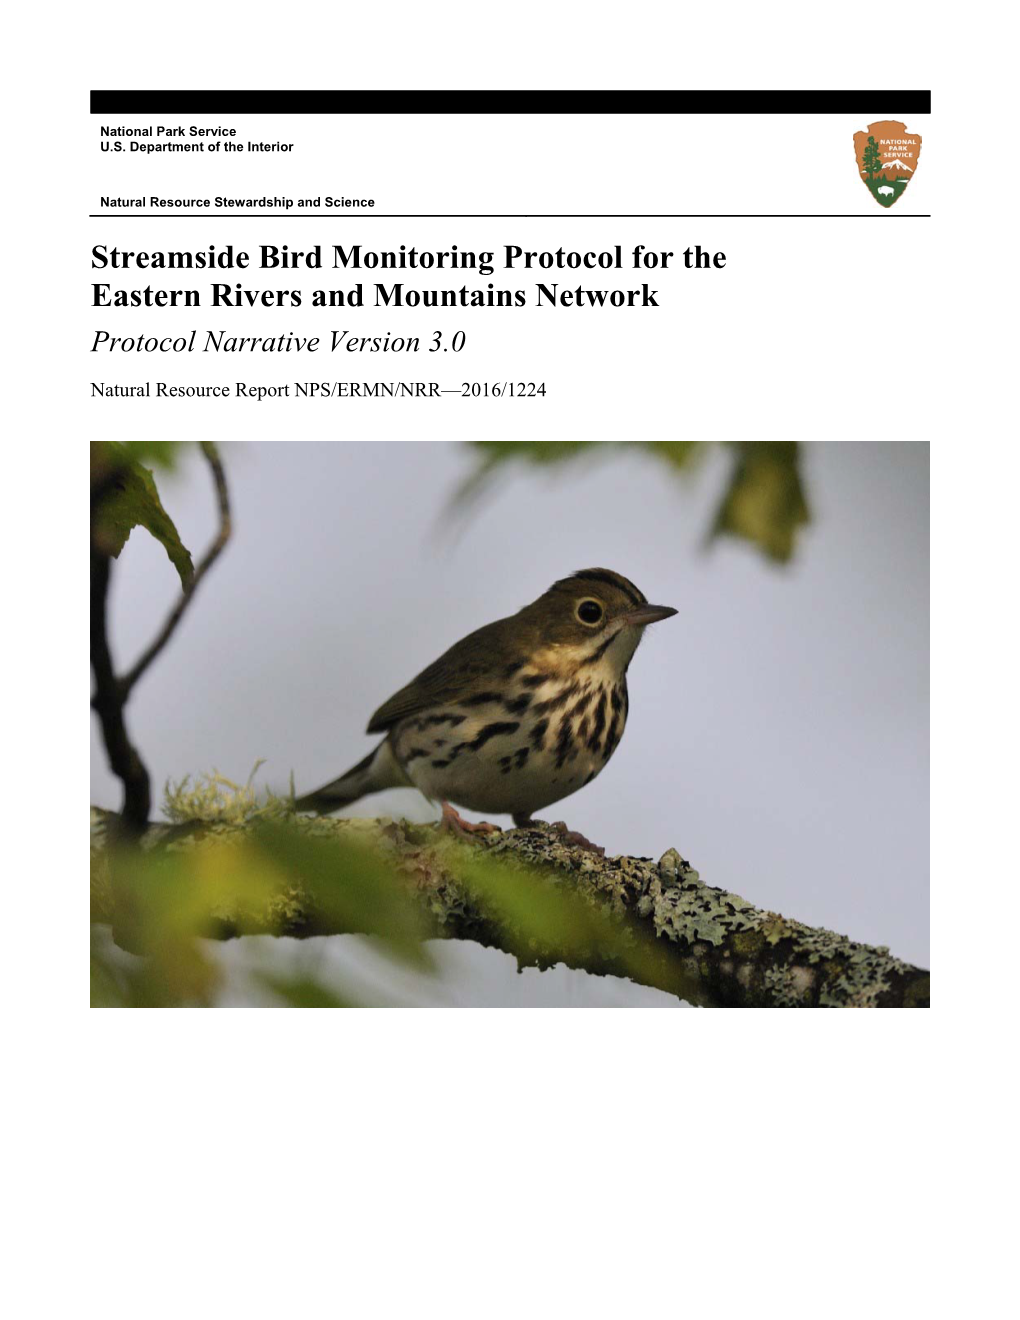 Streamside Bird Monitoring Protocol for the Eastern Rivers and Mountains Network Protocol Narrative Version 3.0